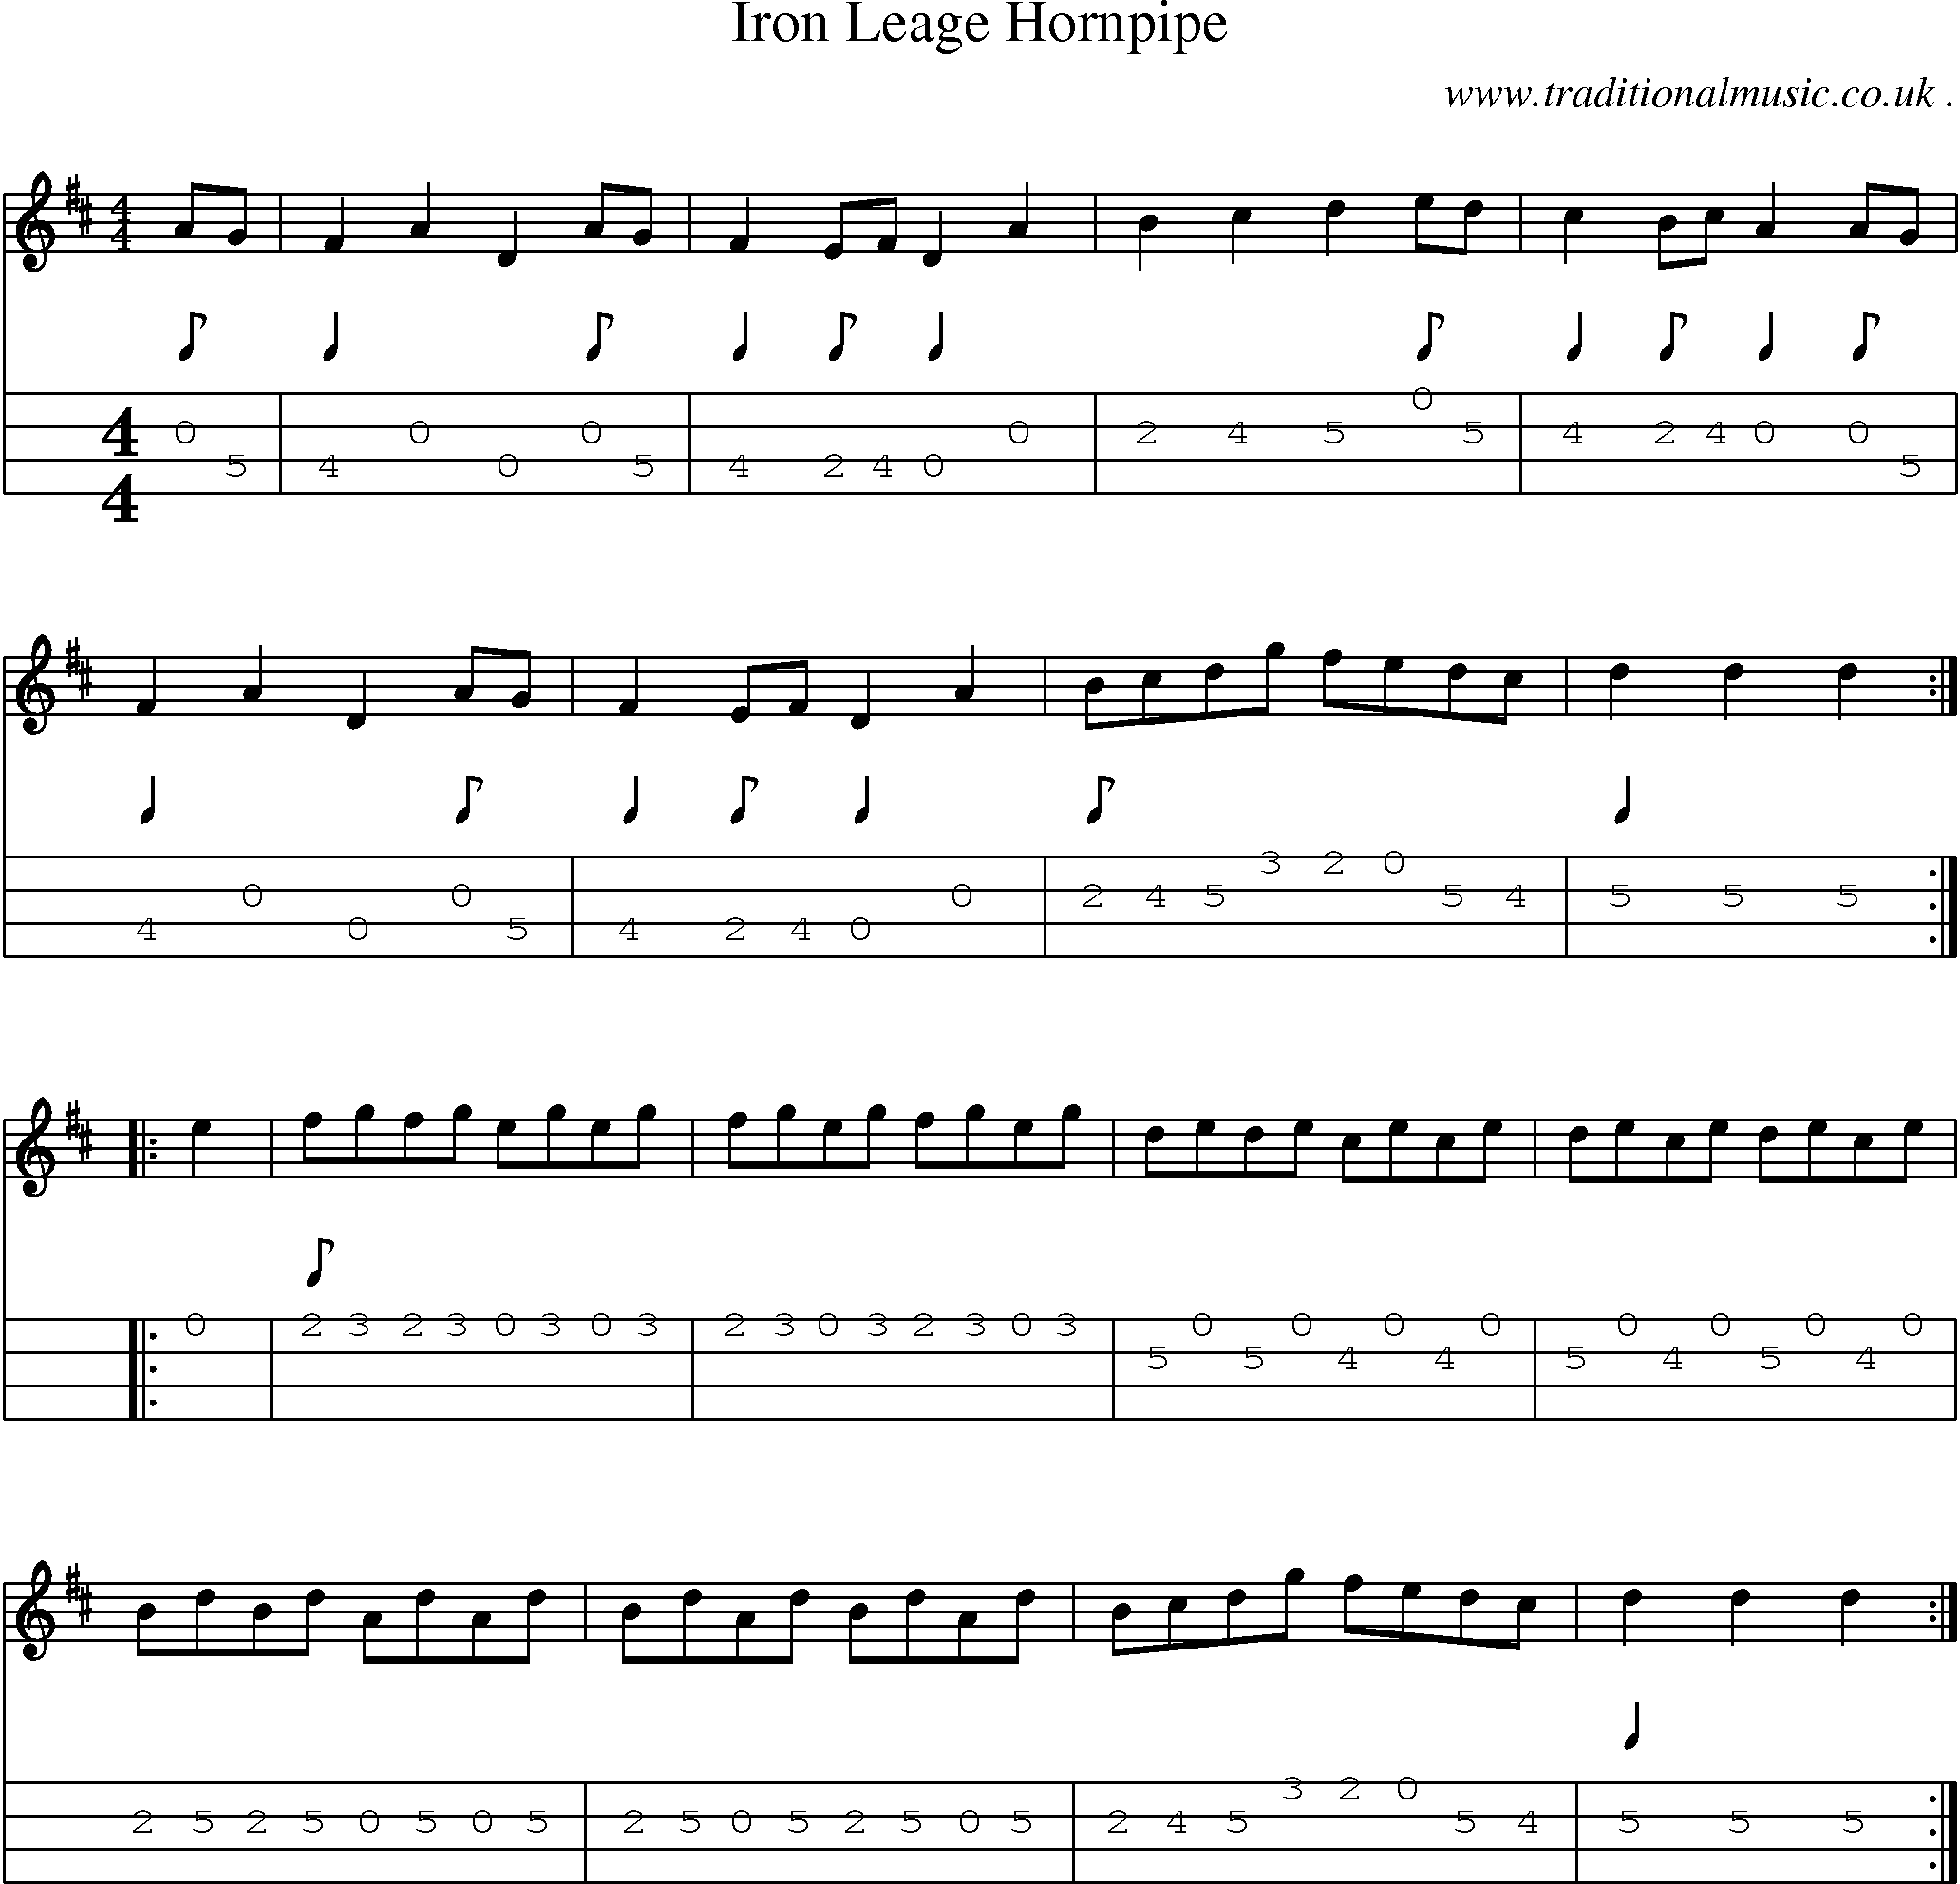 Sheet-Music and Mandolin Tabs for Iron Leage Hornpipe